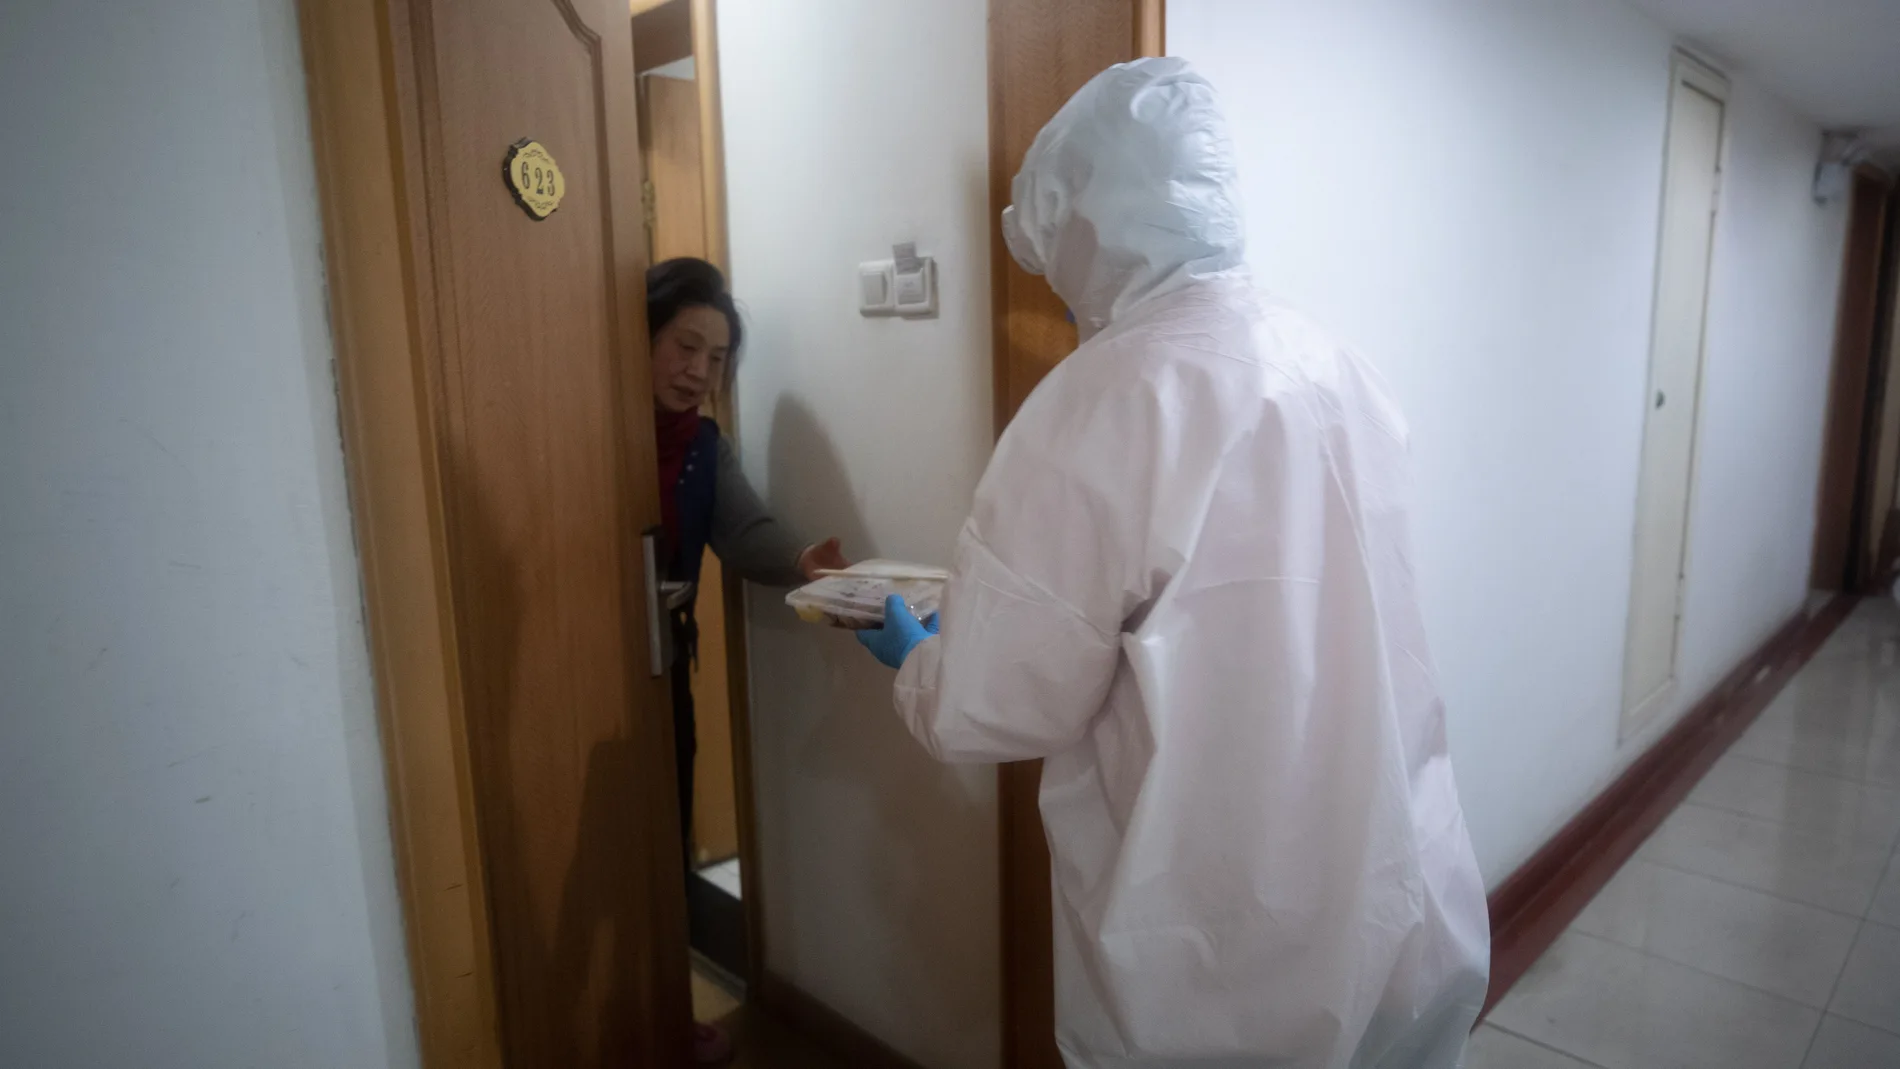 China coronavirus outbreak killed 490 people and infected over 24,000